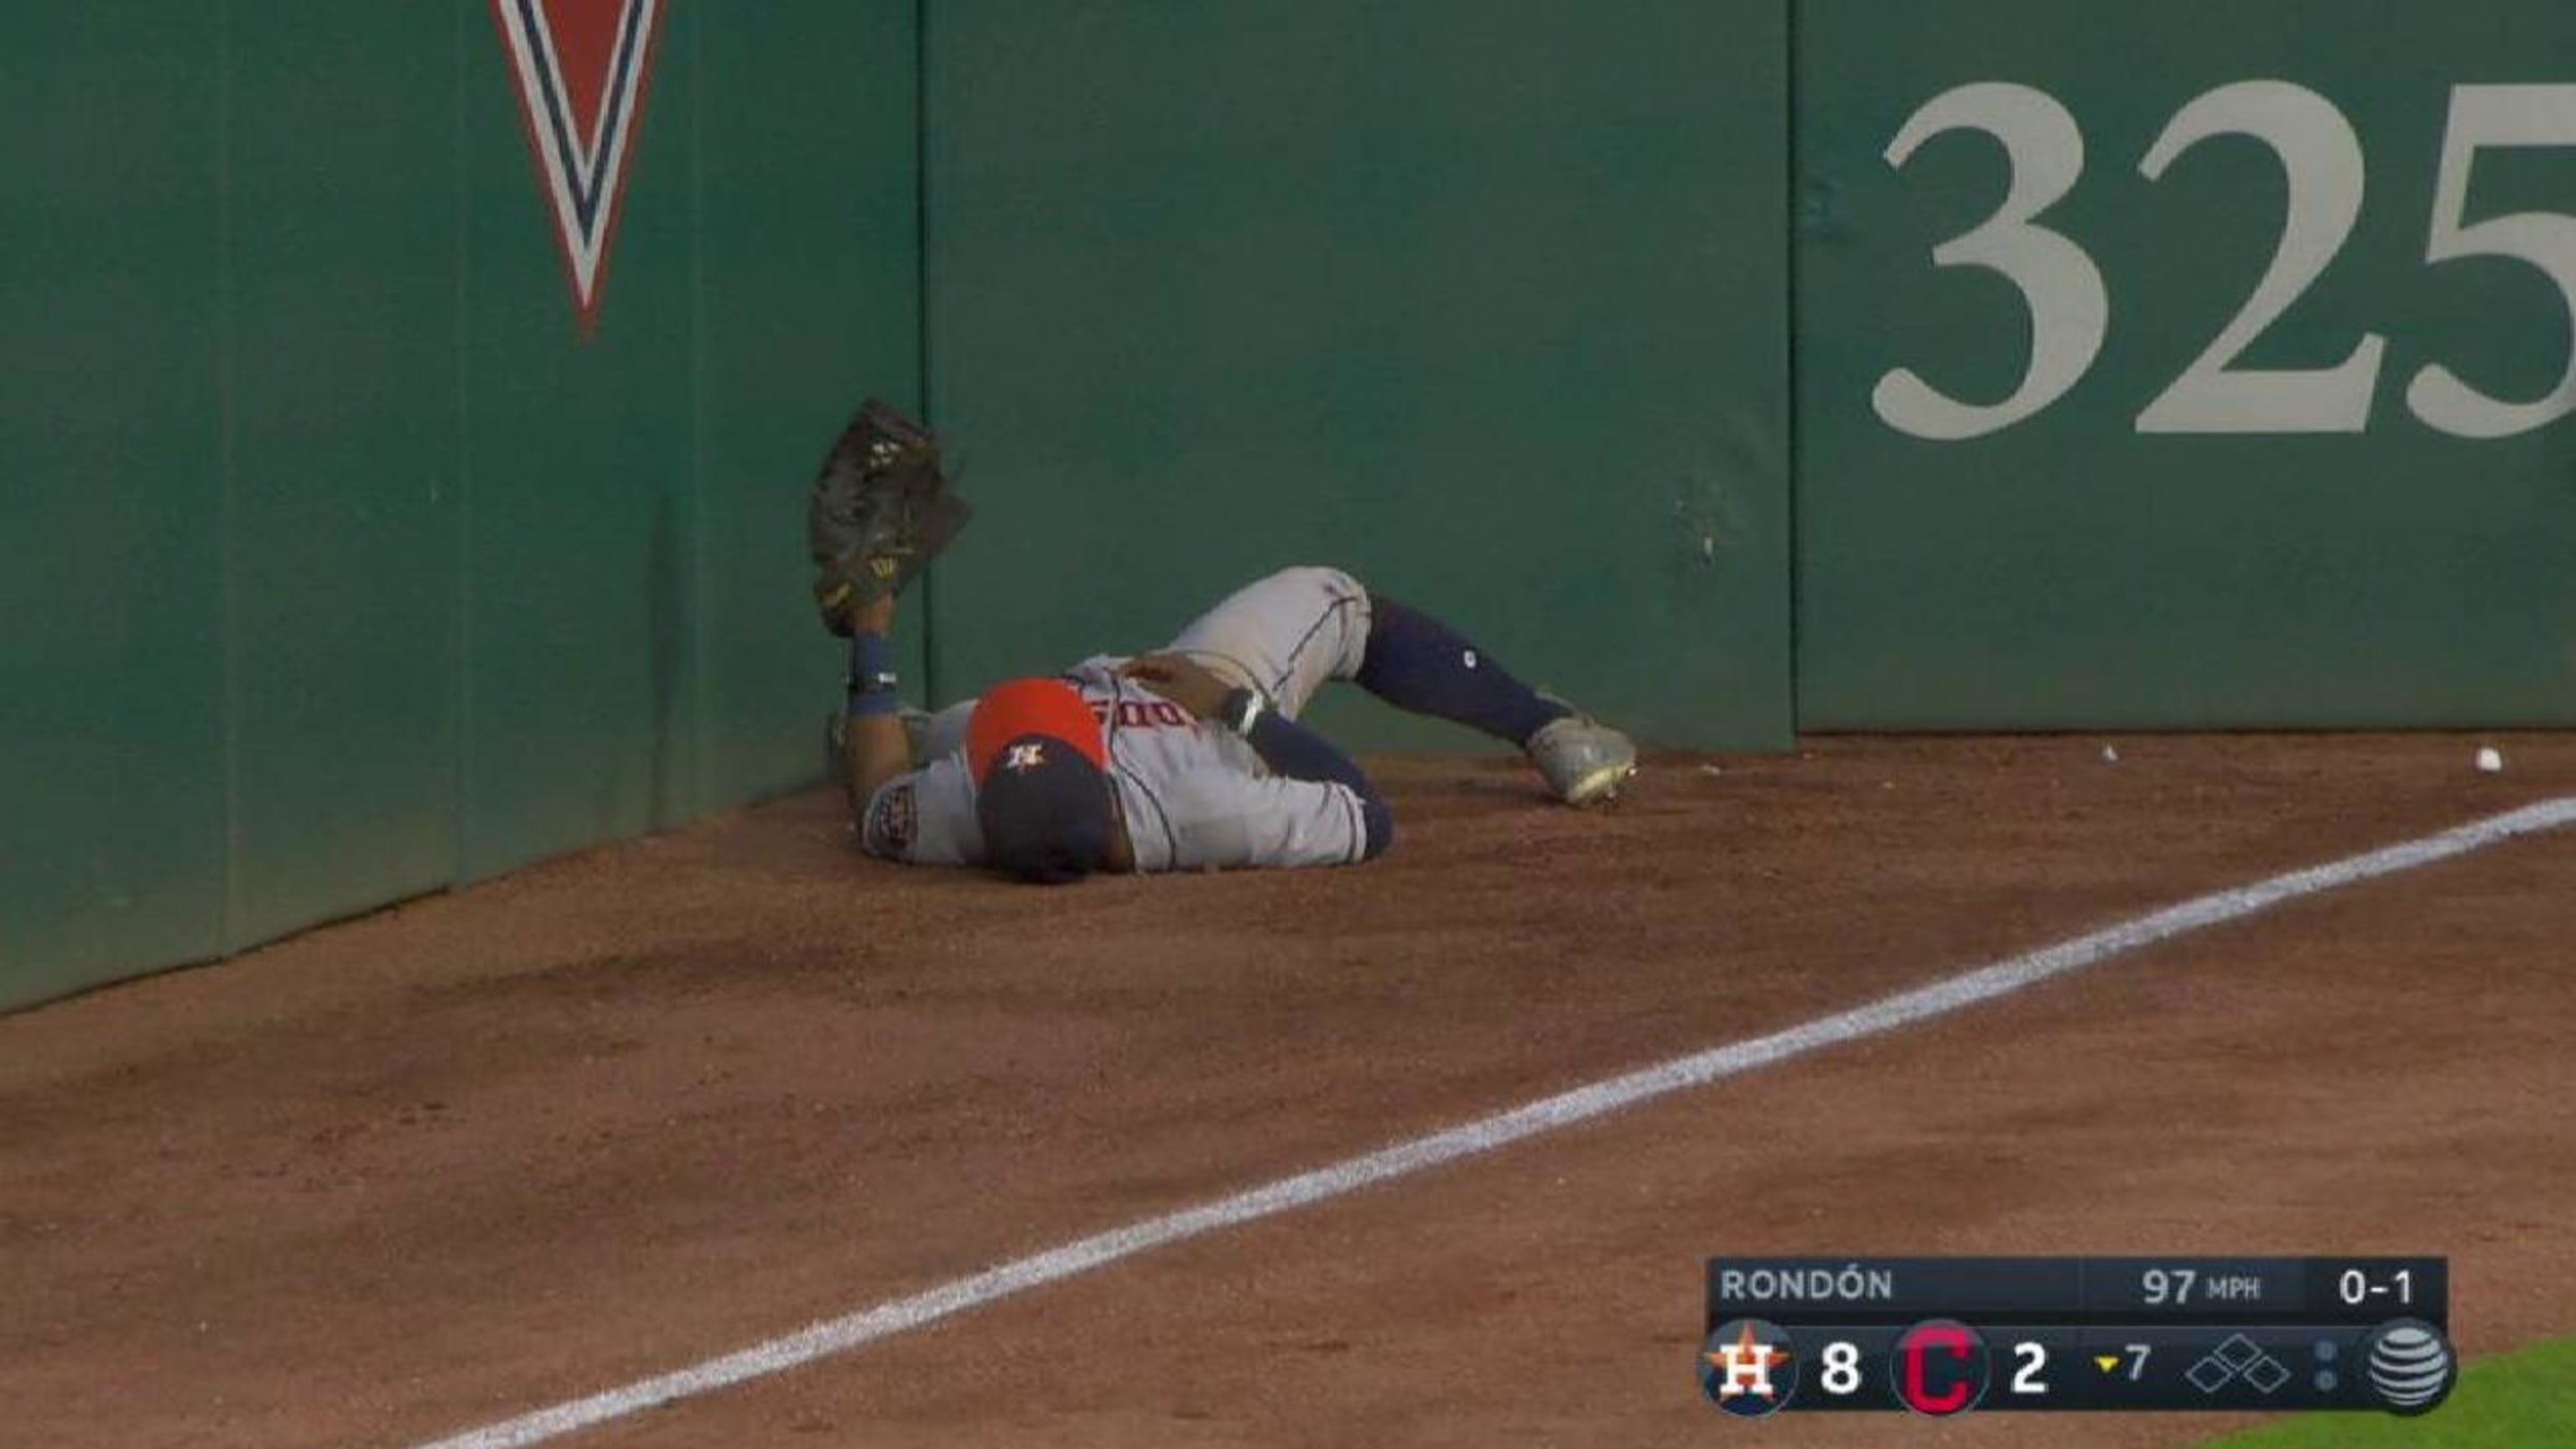 Tony Kemp's leaping catch at wall robs Astros of a run